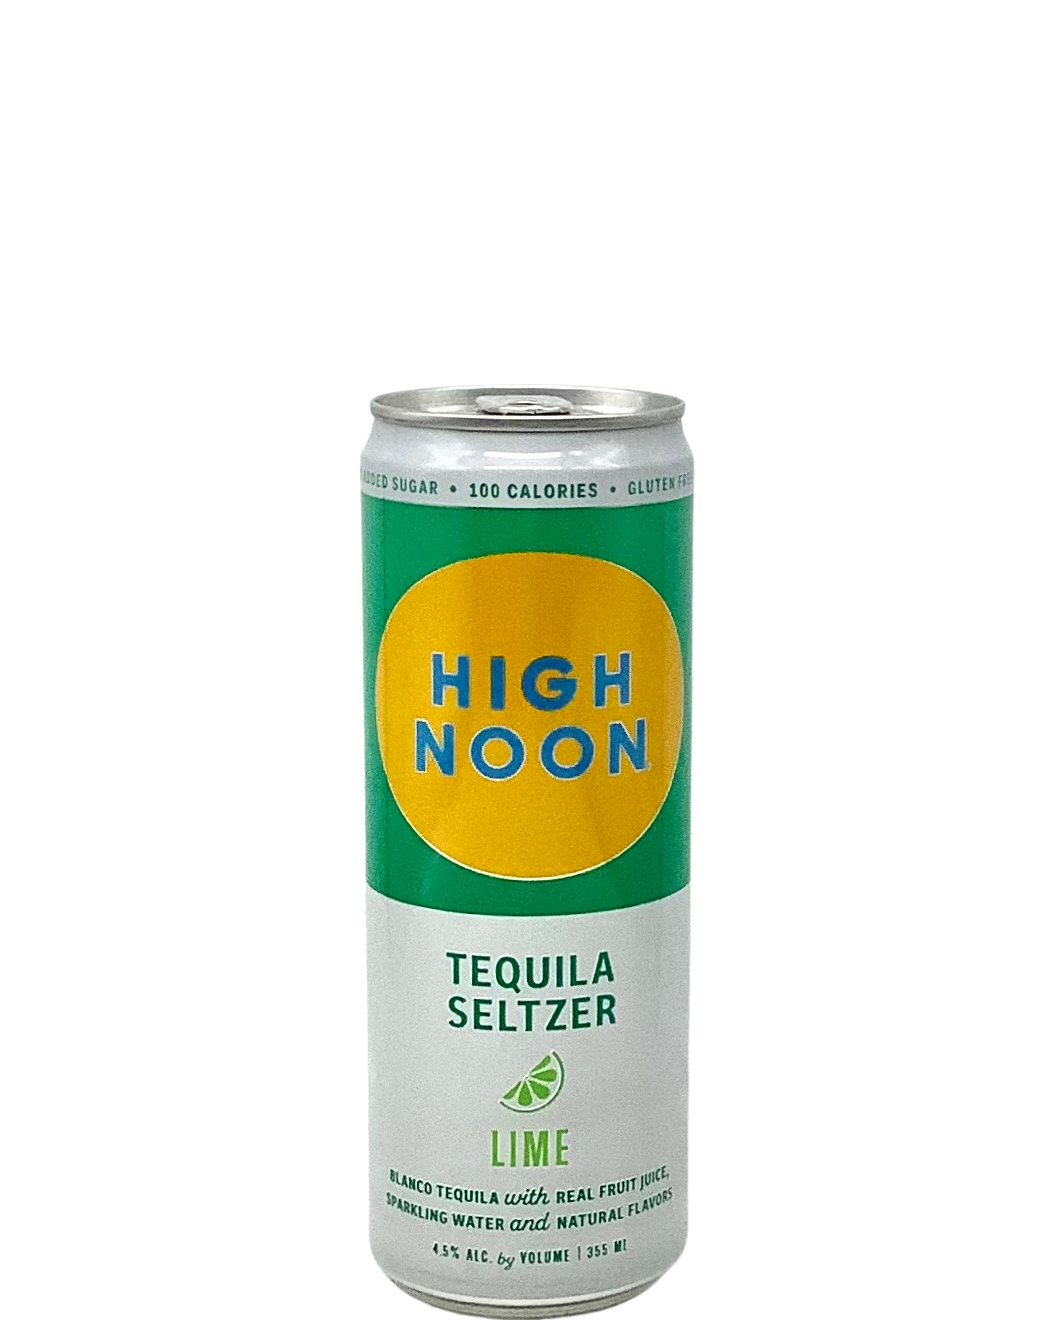 High Noon Tequila Seltzer Lime 355ml Can newarrival